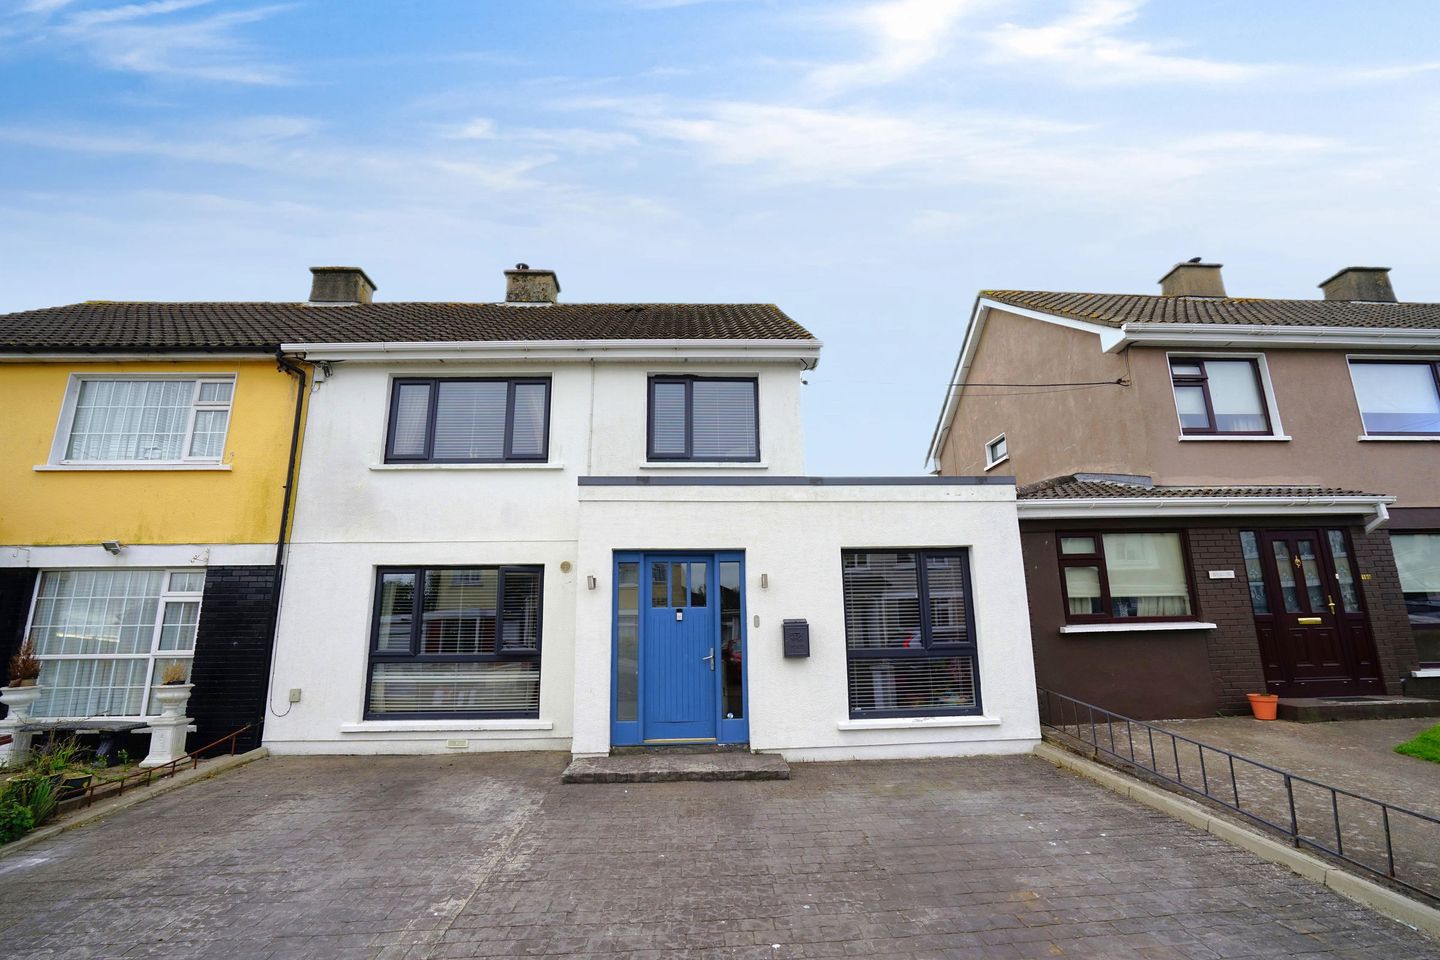 191 Lismore Park, Waterford City, Co. Waterford, X91D25C